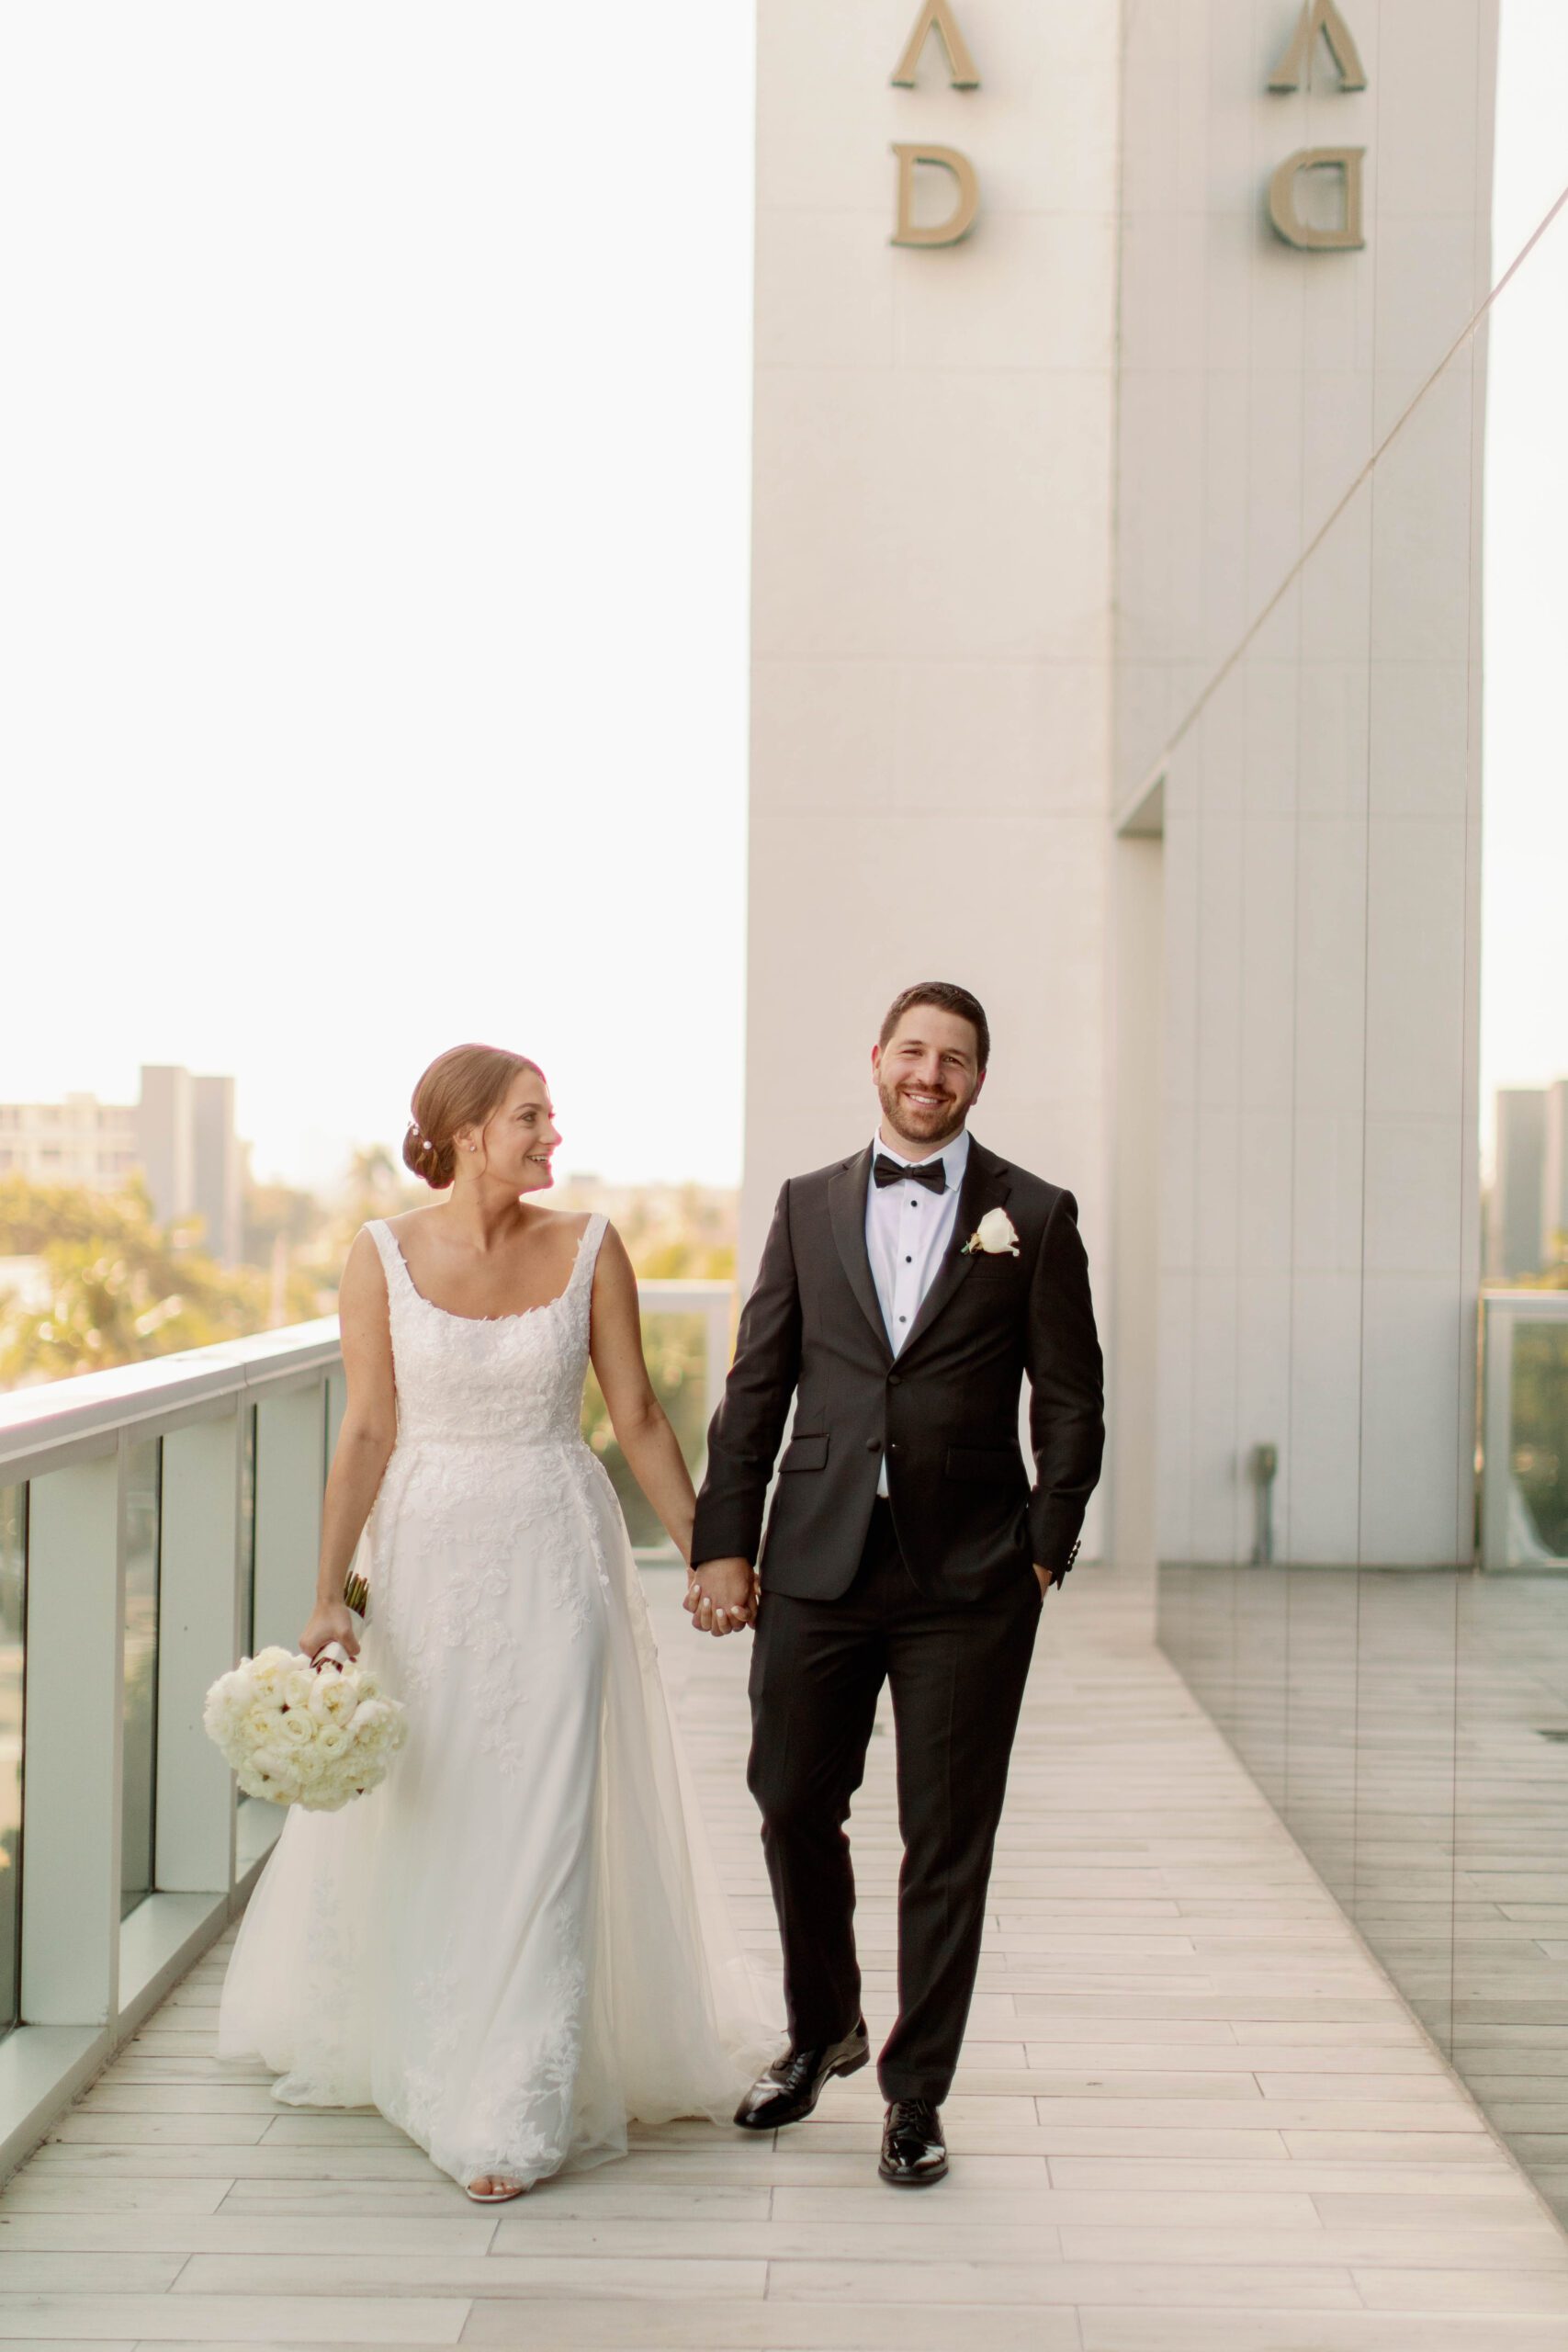 The bride and groom holding hands outside on the balcony and walking towards the camera at The Conrad Hotel, wedding planned by Oh My Occasions